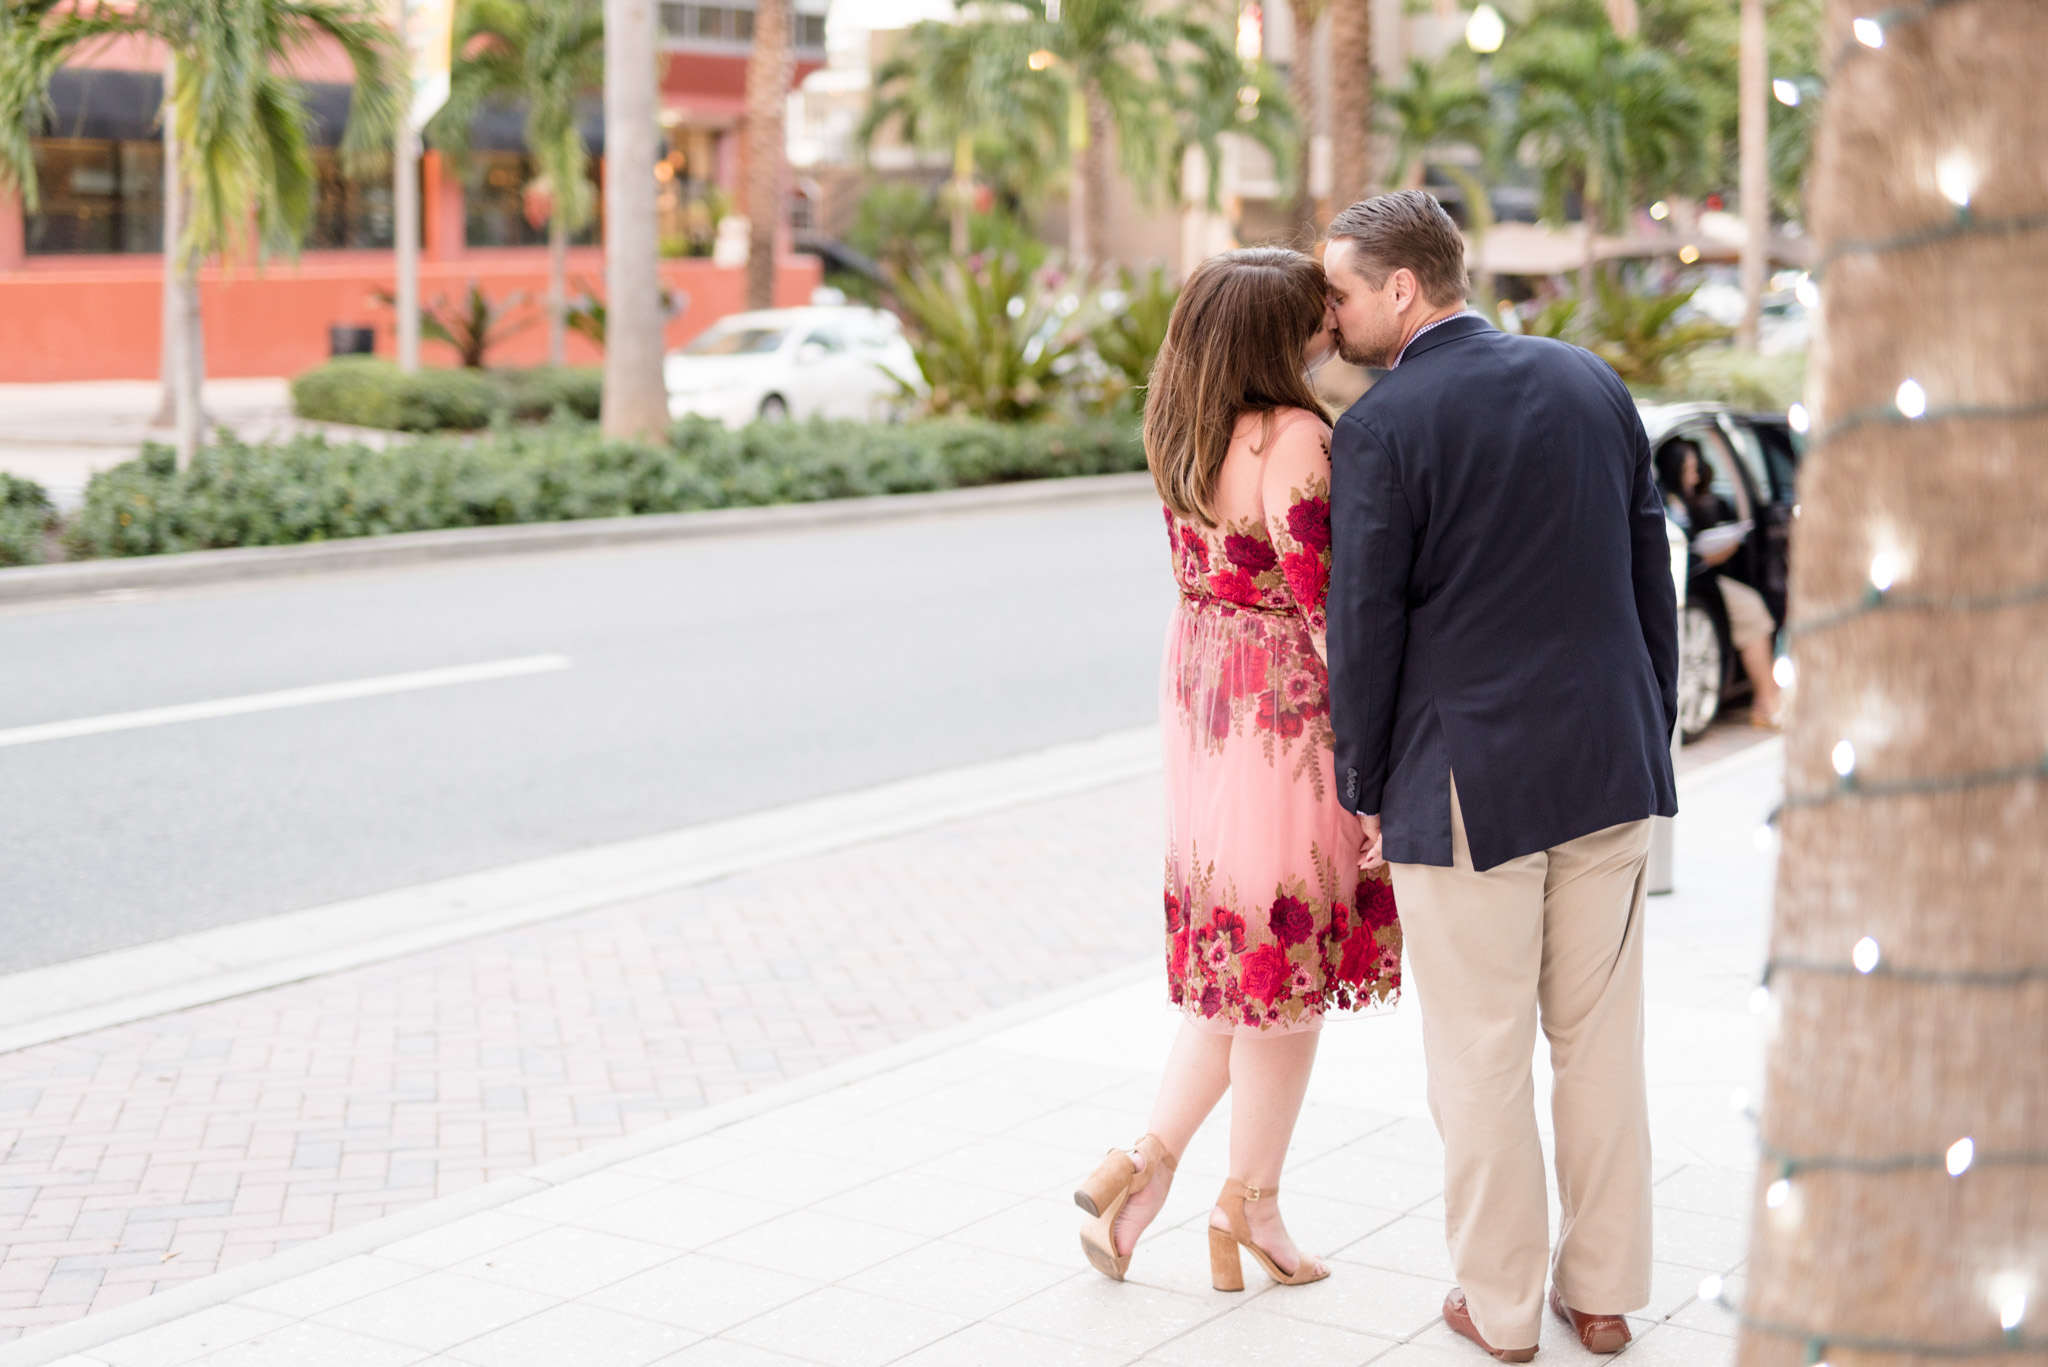 Couple leans in for kiss in urban setting.